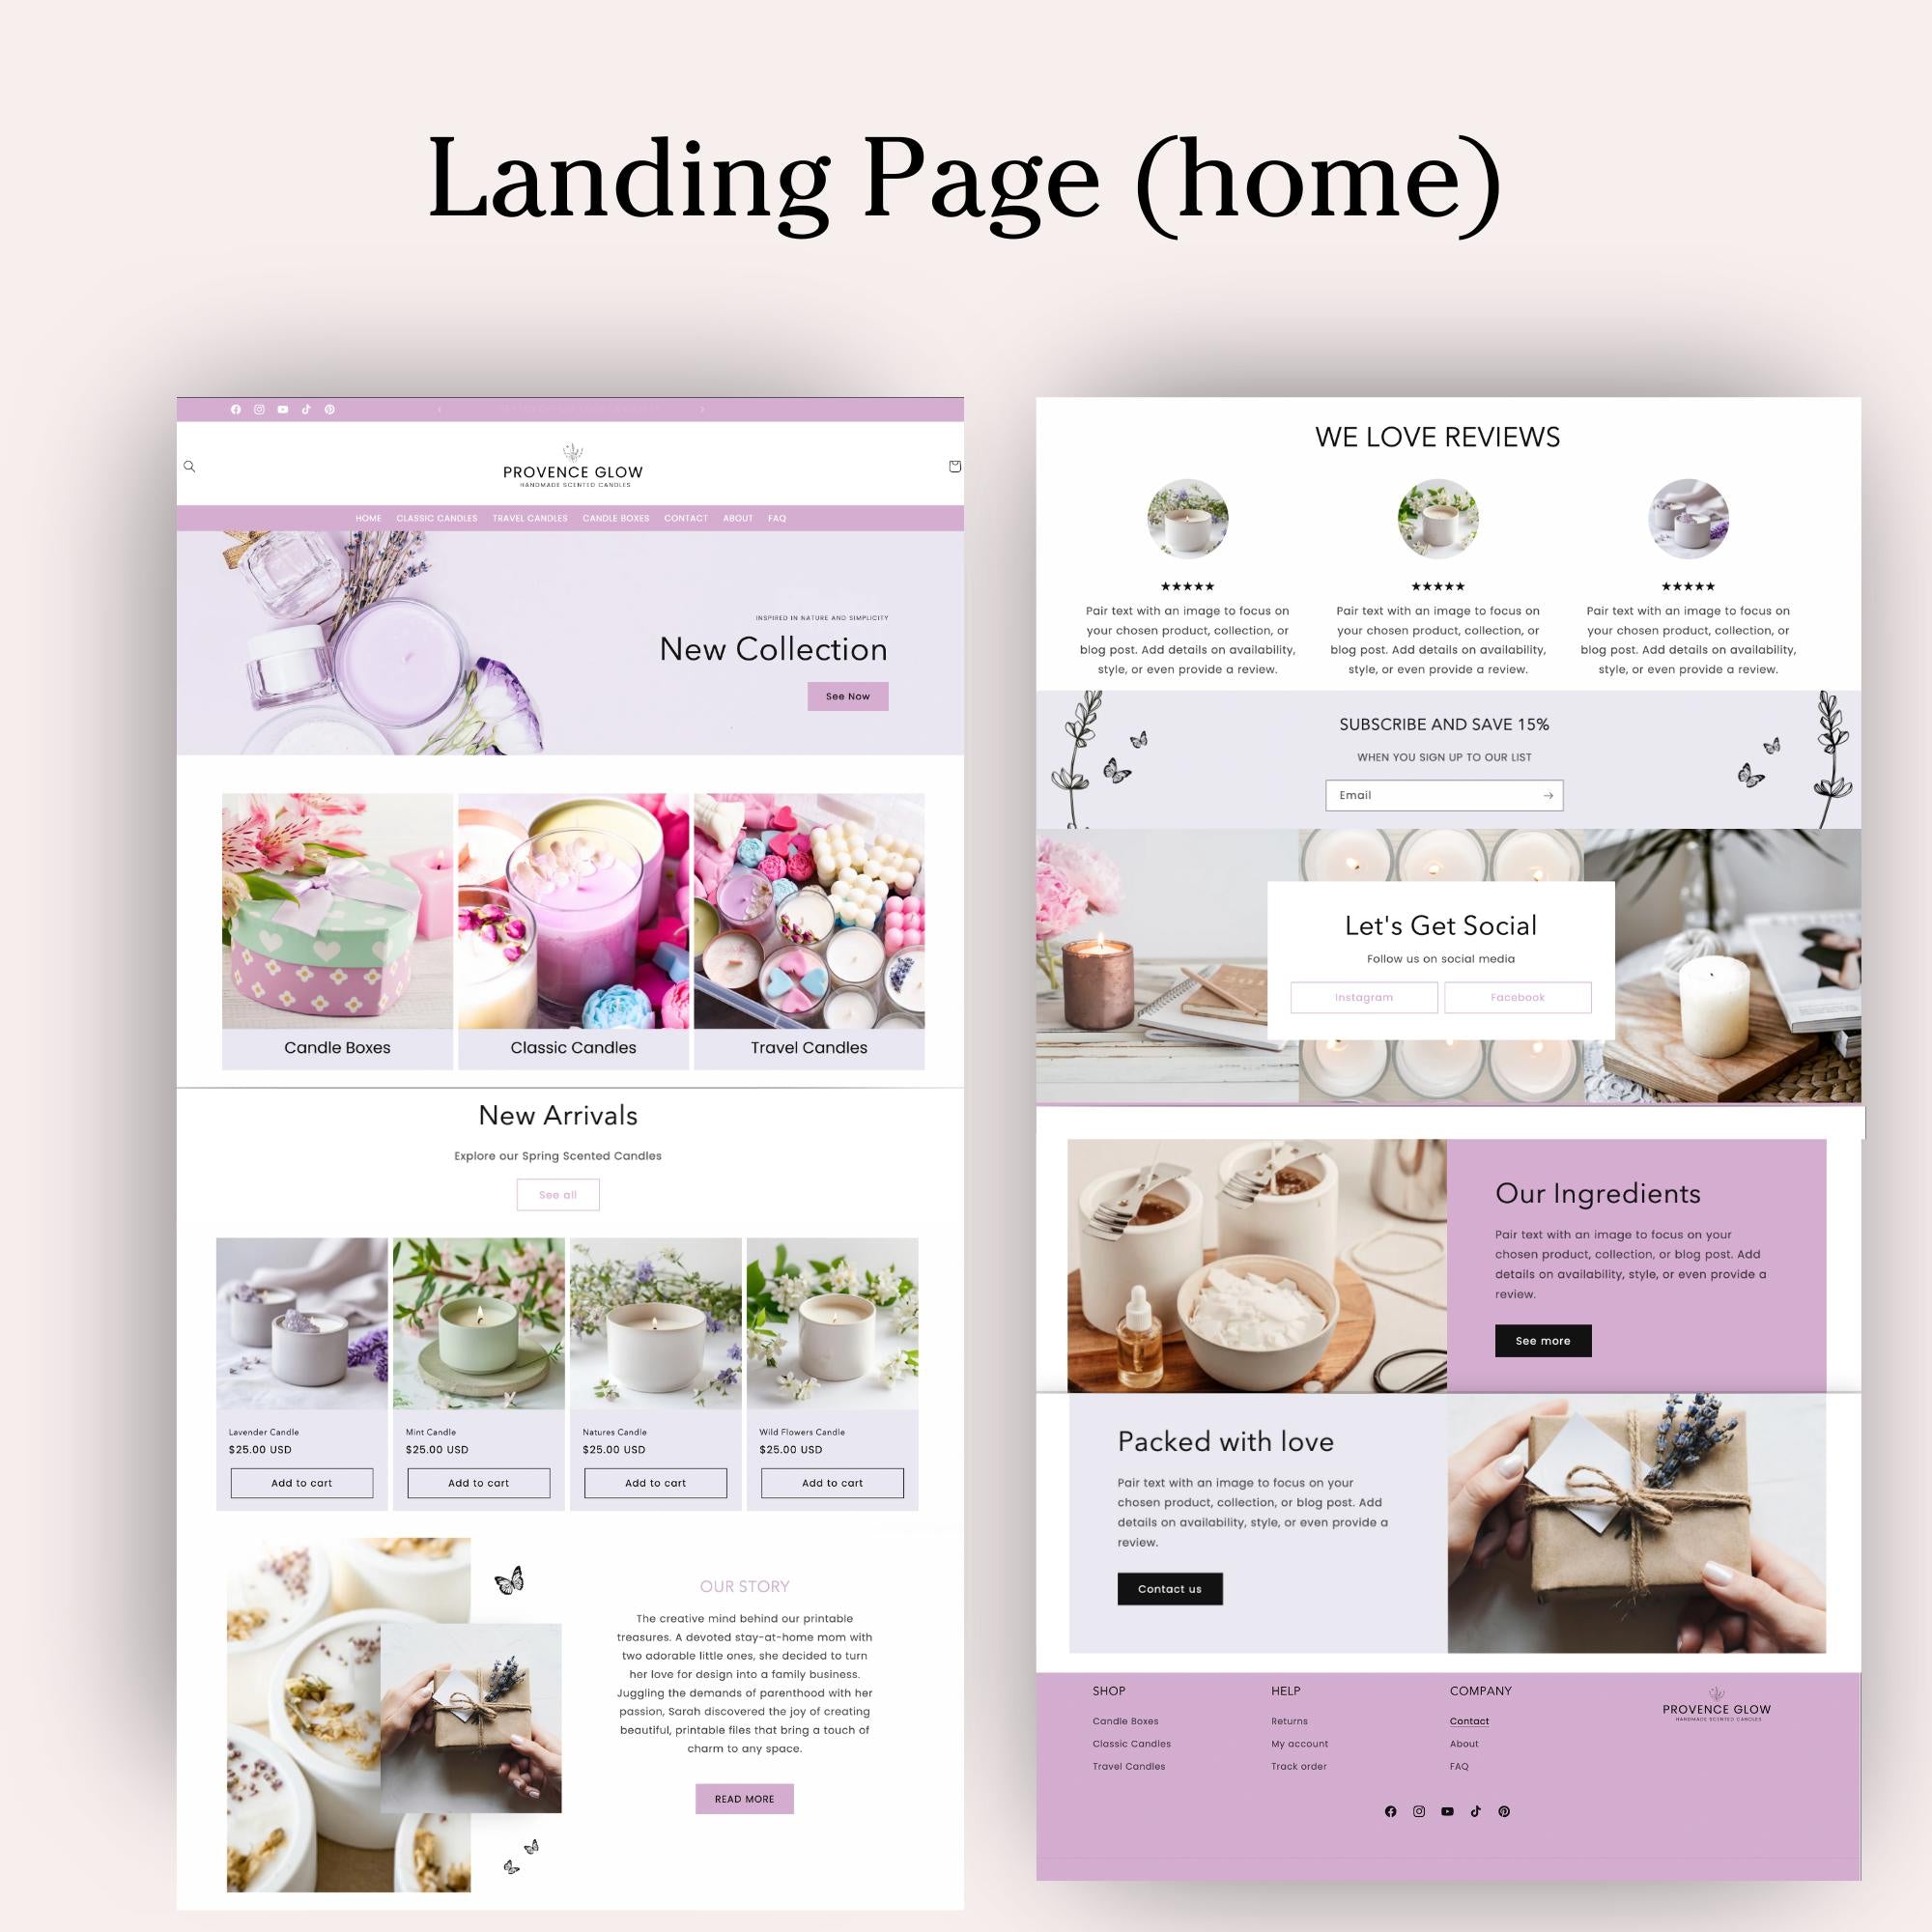 Luxury lavender candles shopify template